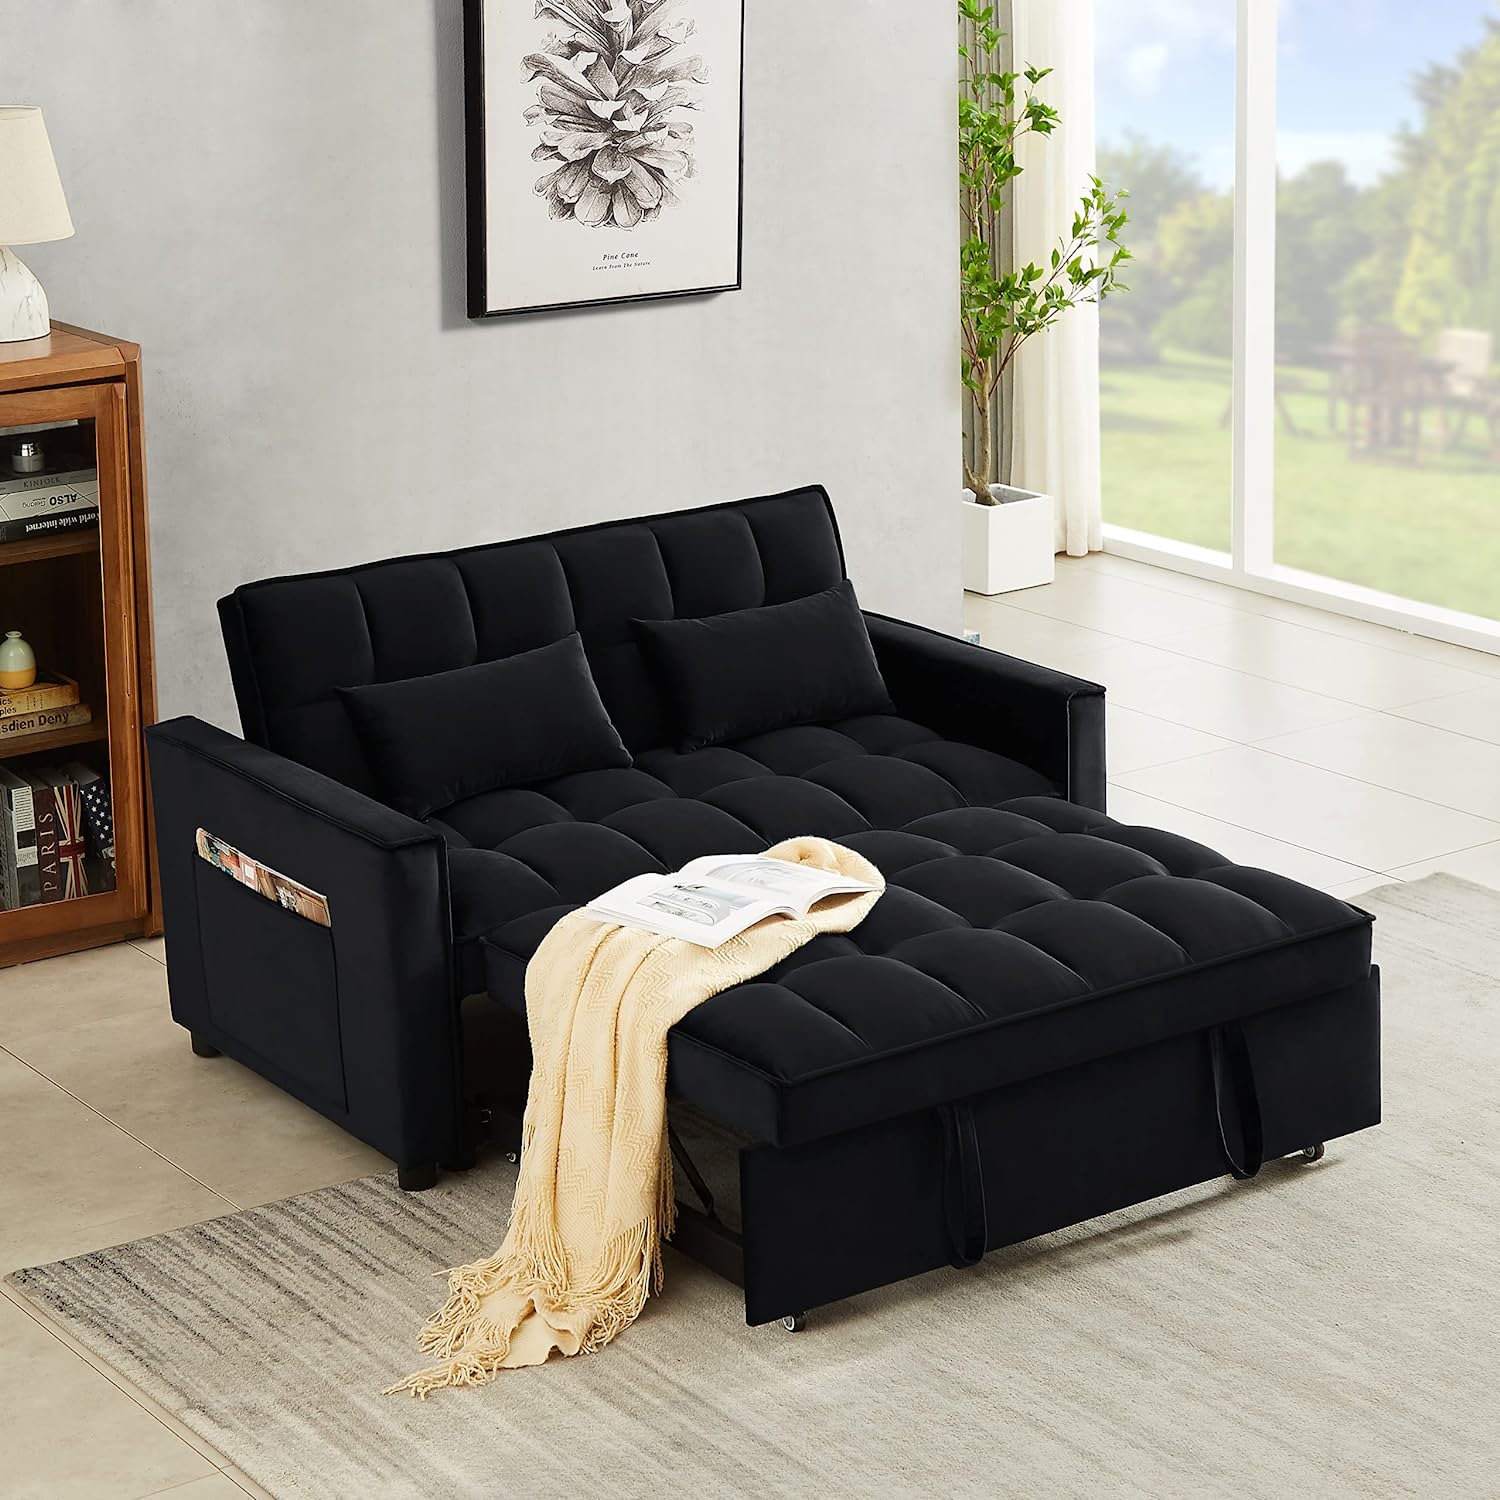 Muumblus 55" Pull Out Sofa Bed, Convertible Sleeper Loveseat with Pull Out Bed, Modern Velvet Sleeper for Living Room, Adjsutable Backrest, Black - image 1 of 8